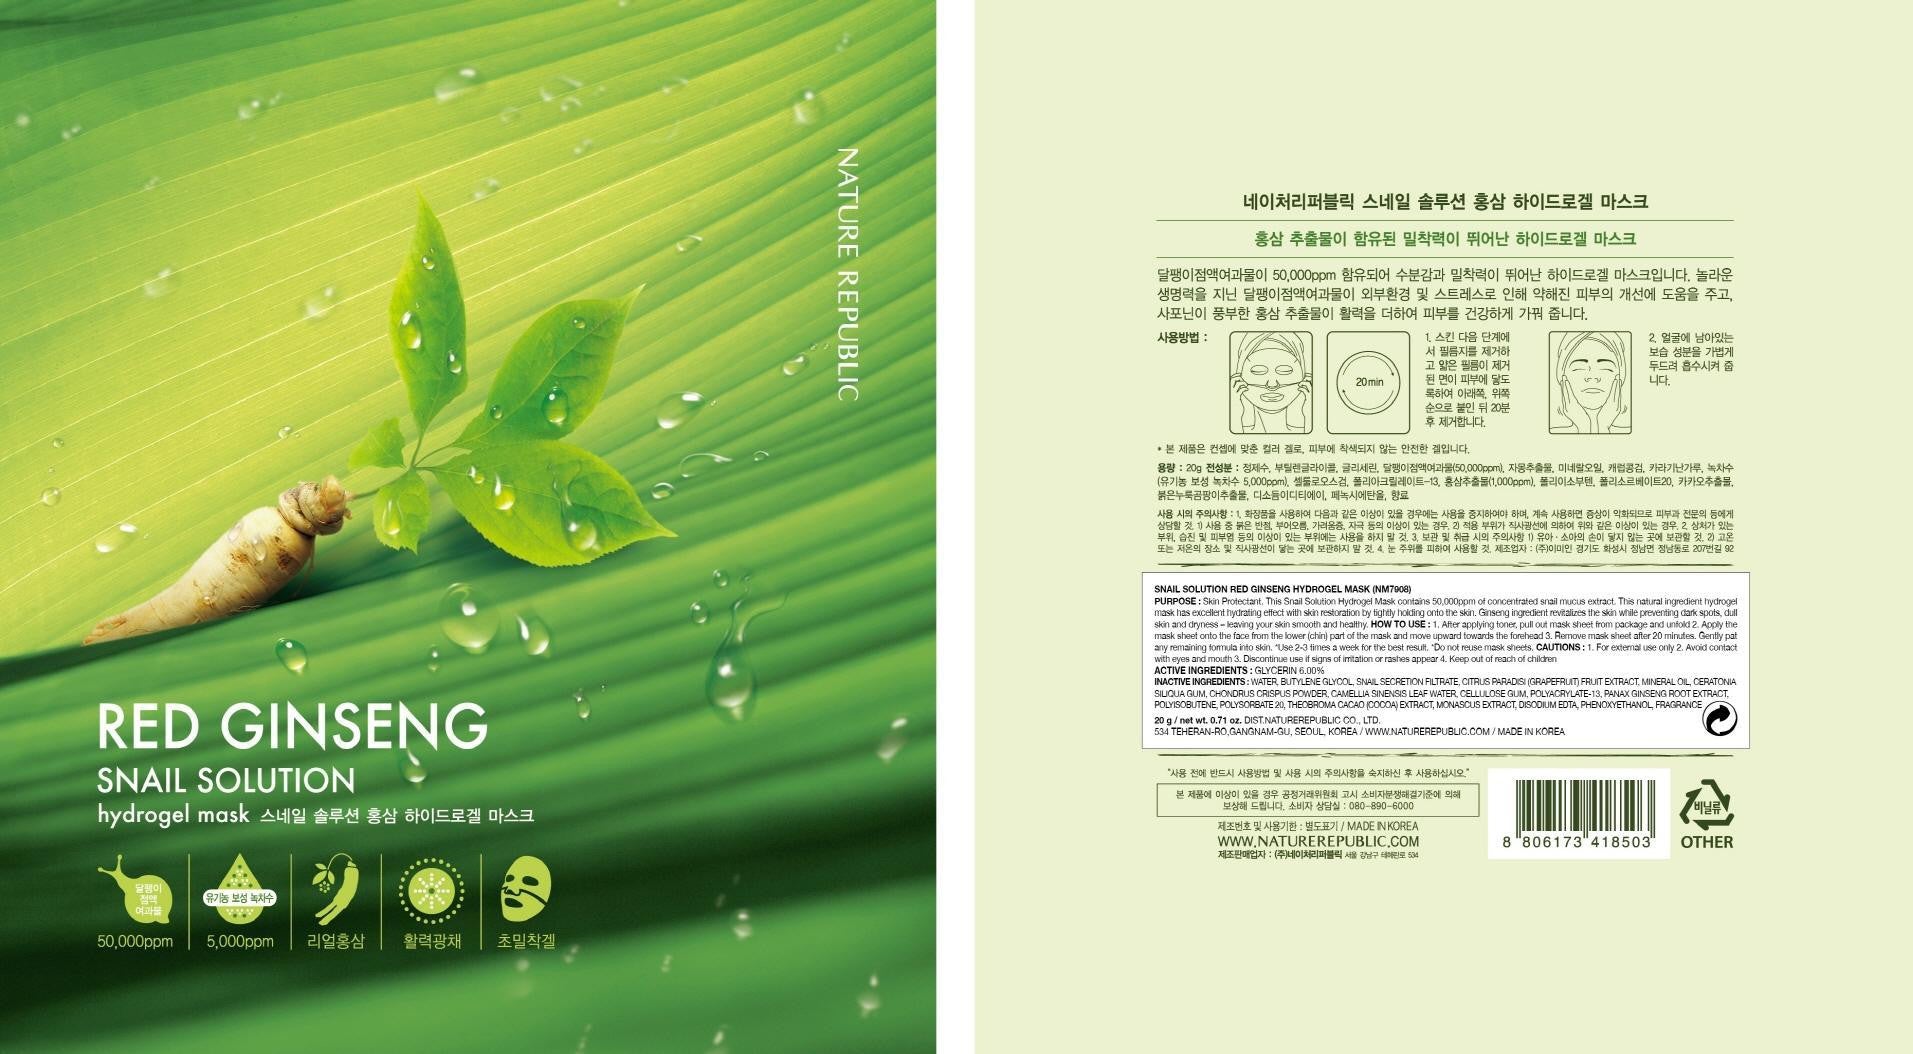 Nature Republic – Snail Solution Red Ginseng Hydrogel Mask